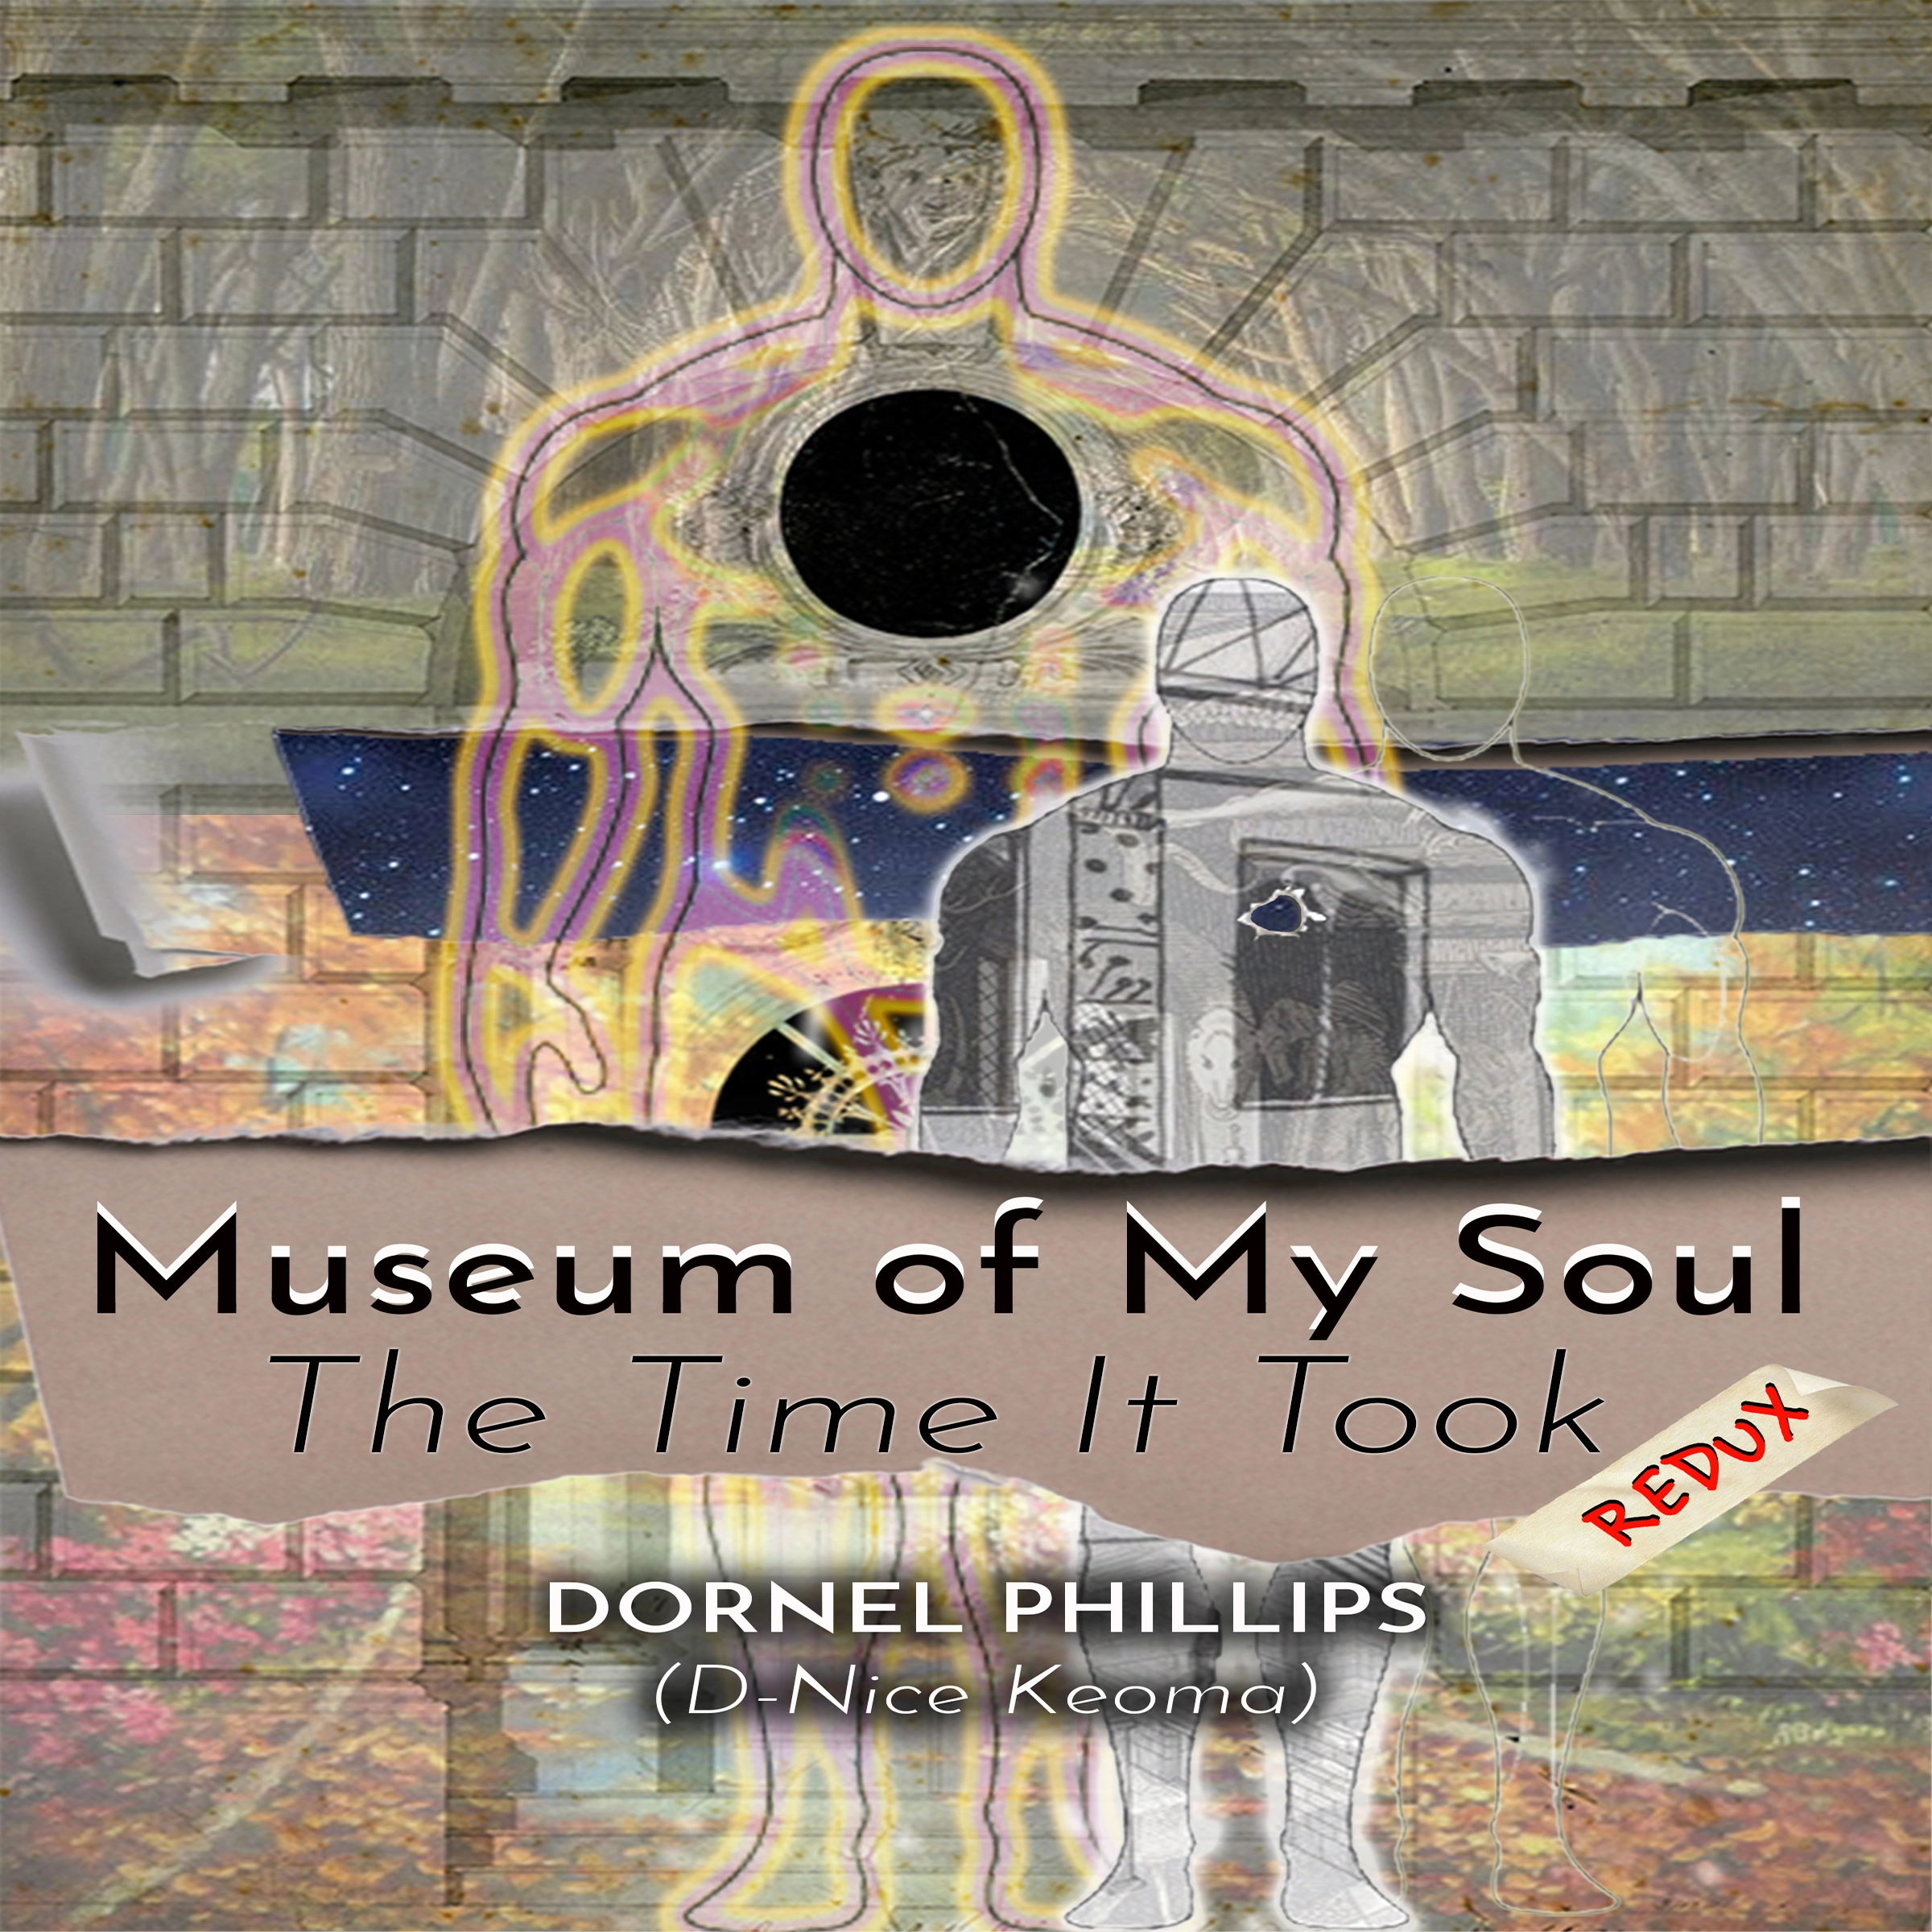 Museum of My Soul: Redux Audiobook by Dornel Phillips AKA D-Nice Keoma